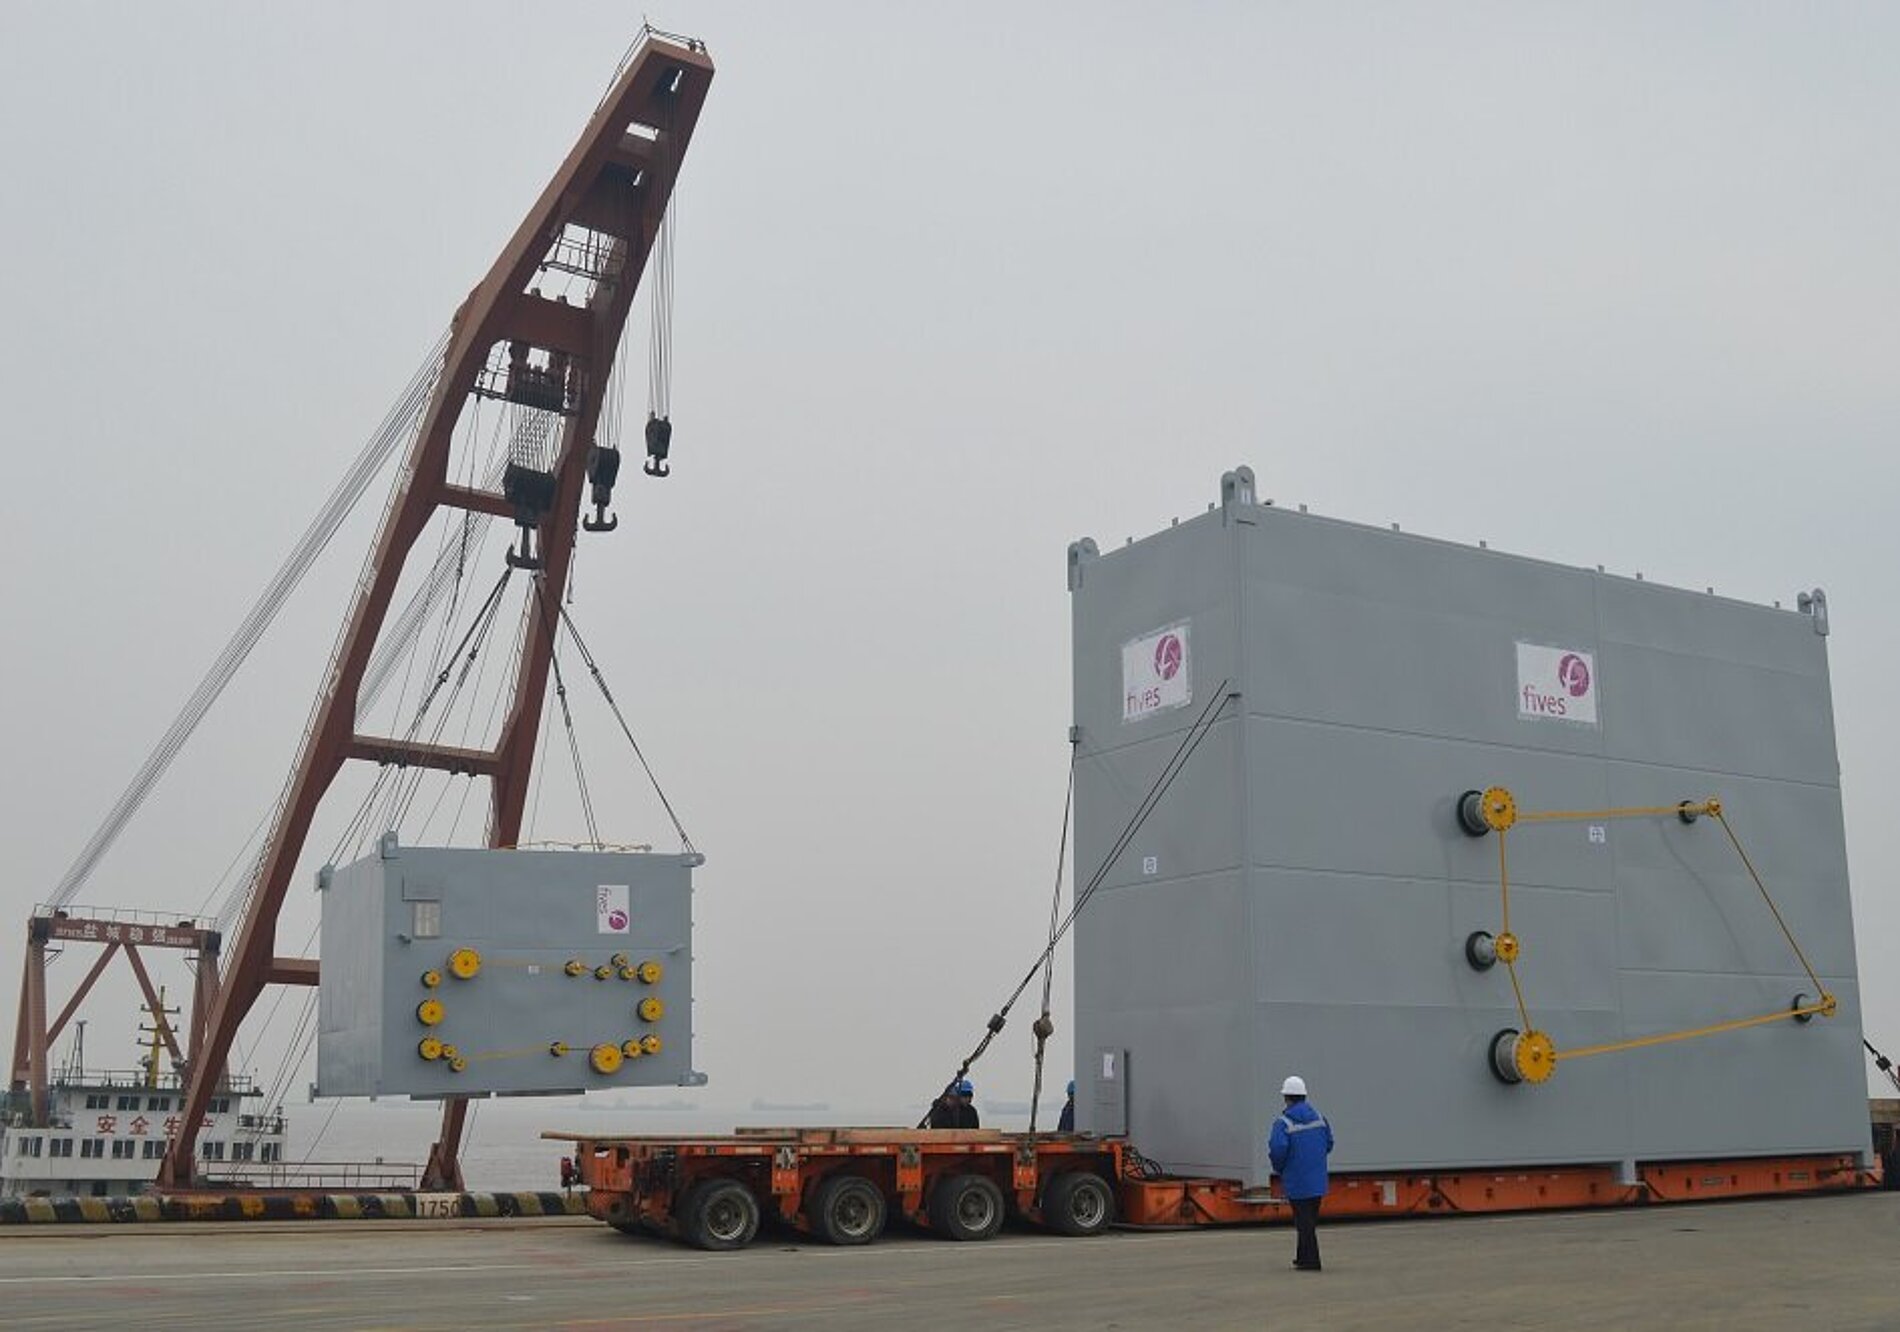 First LNG project for Fives and Hangzhou Fortune Gas Cryogenic Group Co., Ltd.